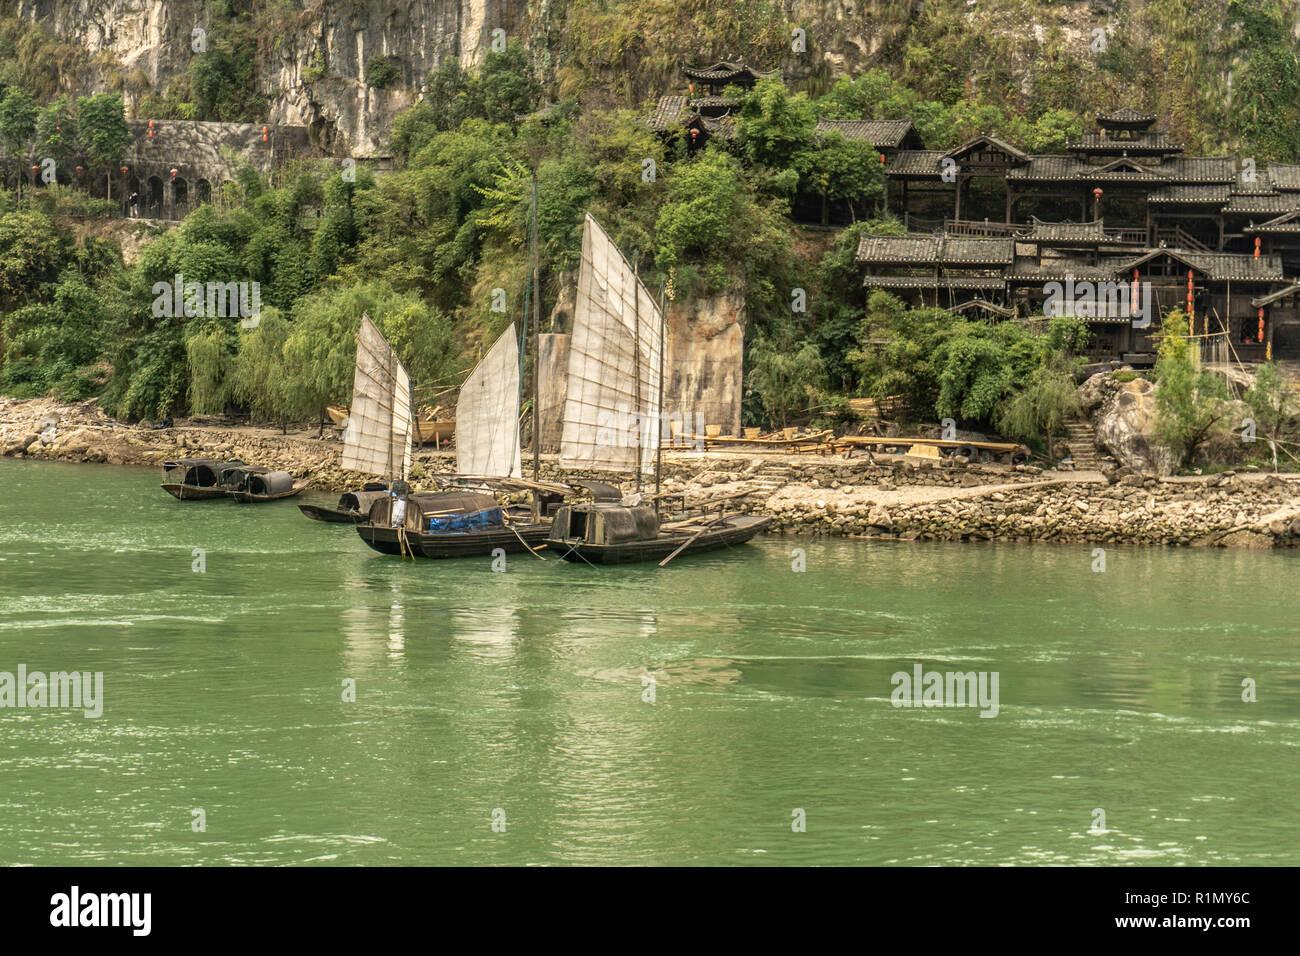 Sampans with sails along Yangtze River with traditional houses in background Stock Photo